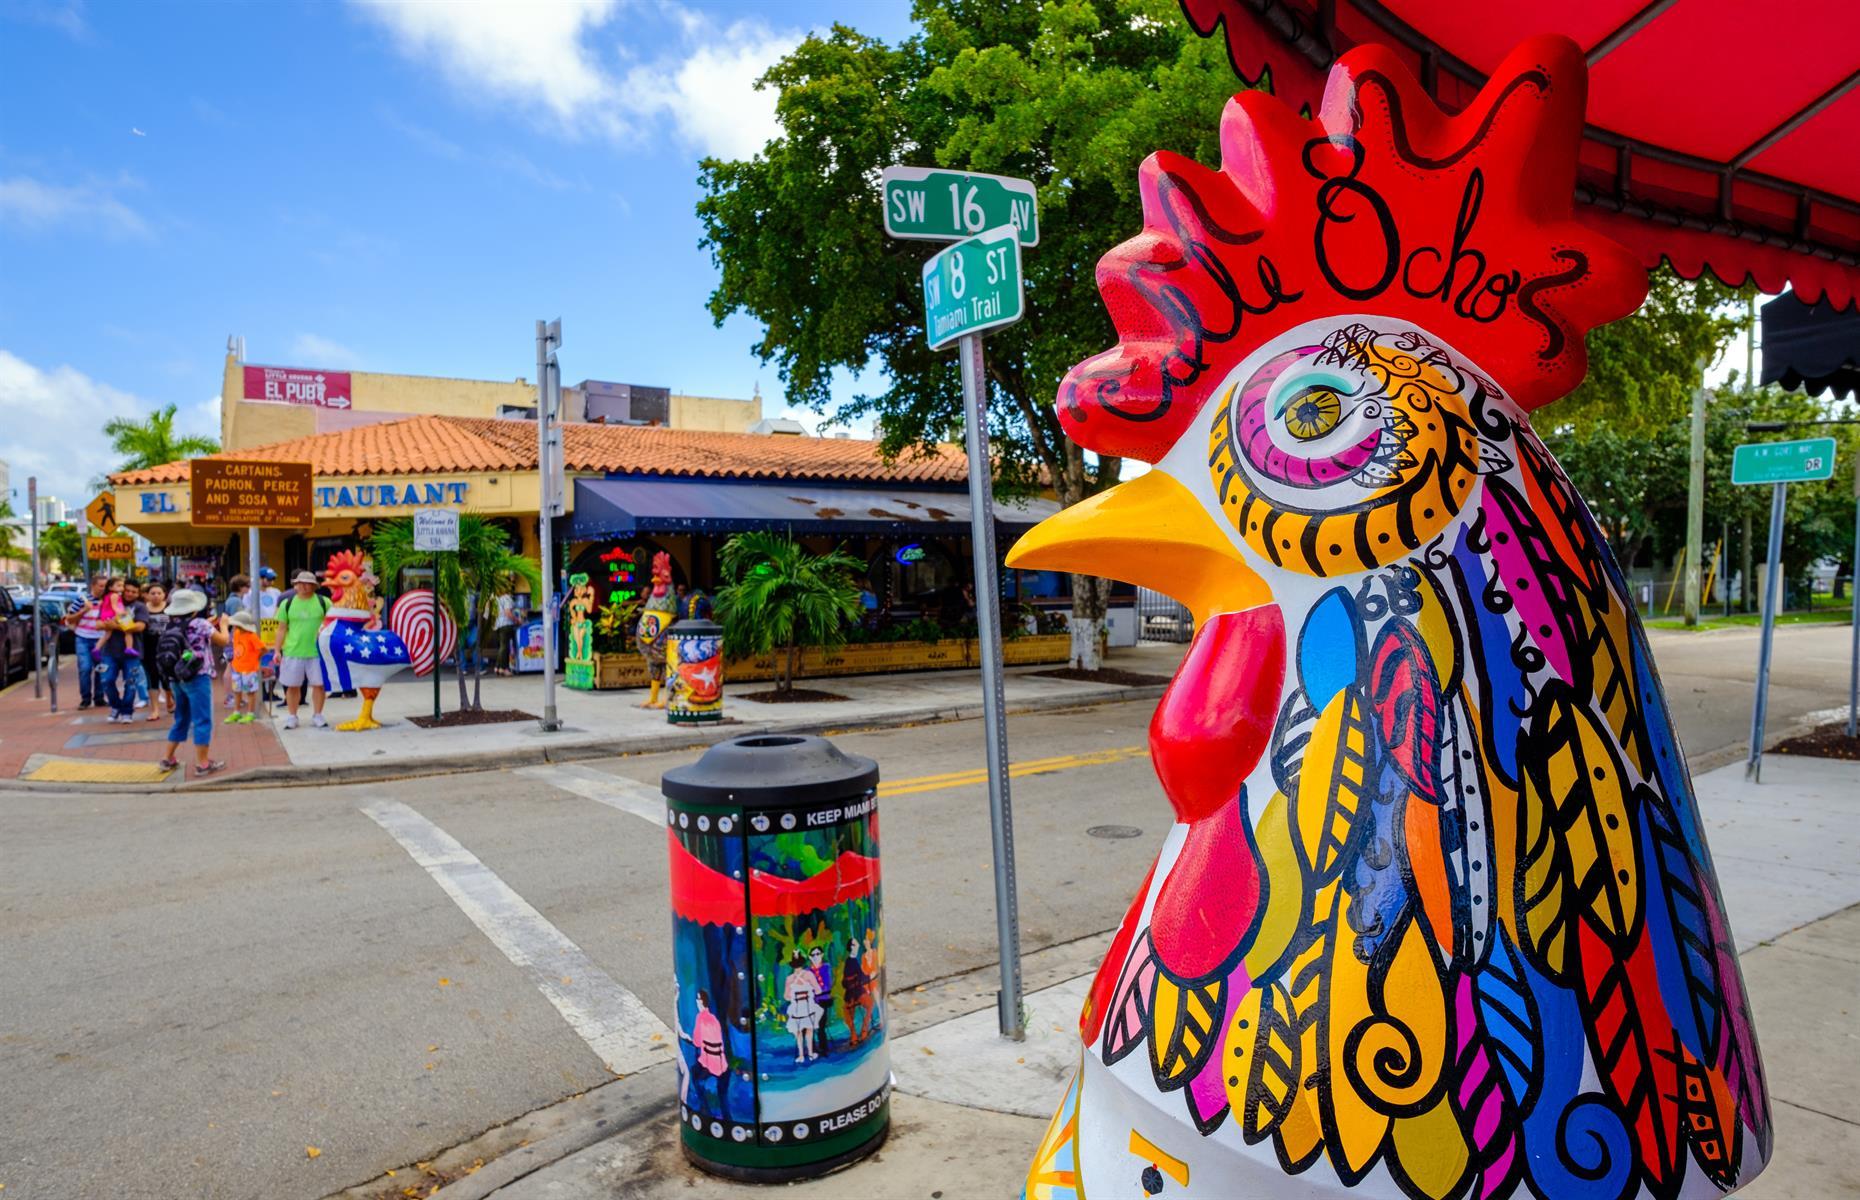 <p>Little Havana, home to Miami’s Cuban community, is a vibrant neighbourhood that offers a taste of Caribbean life. There’s arguably no better way to explore a culture than through its food, and this is the philosophy behind the <a href="https://www.miamiculinarytours.com/tour/little-havana-food-tour/">Little Havana Food & Cultural Tour</a>. Learn about the history of the Cuban diaspora while sampling Cuban coffee and empanadas at a local ventanita (coffee window). Other treats include a real mojito, fresh-pressed sugarcane juice and churros. The standout, though, has to be the Cubano: a traditional Cuban sandwich with meat, Swiss cheese, pickles and mustard.</p>  <p><a href="https://www.loveexploring.com/galleries/93049/the-best-food-tours-in-the-worlds-most-exciting-cities?page=1"><strong>These are the best food tours in world-class cities</strong></a></p>